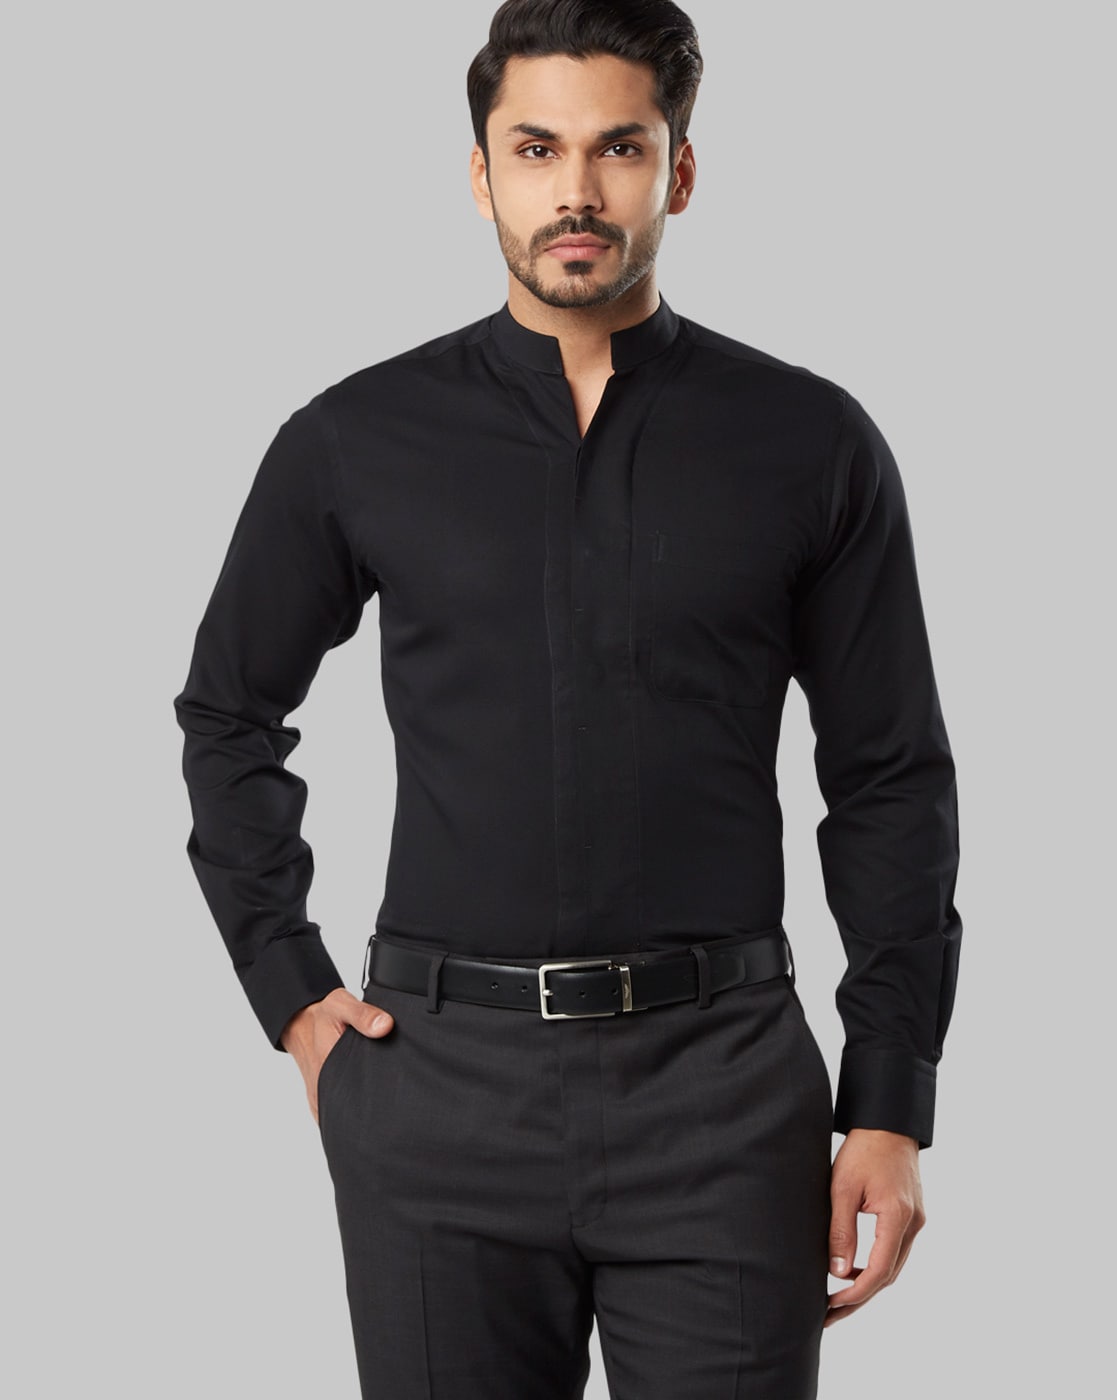 7 Smooth Men's Wrinkle-Free Shirts - Forbes Vetted